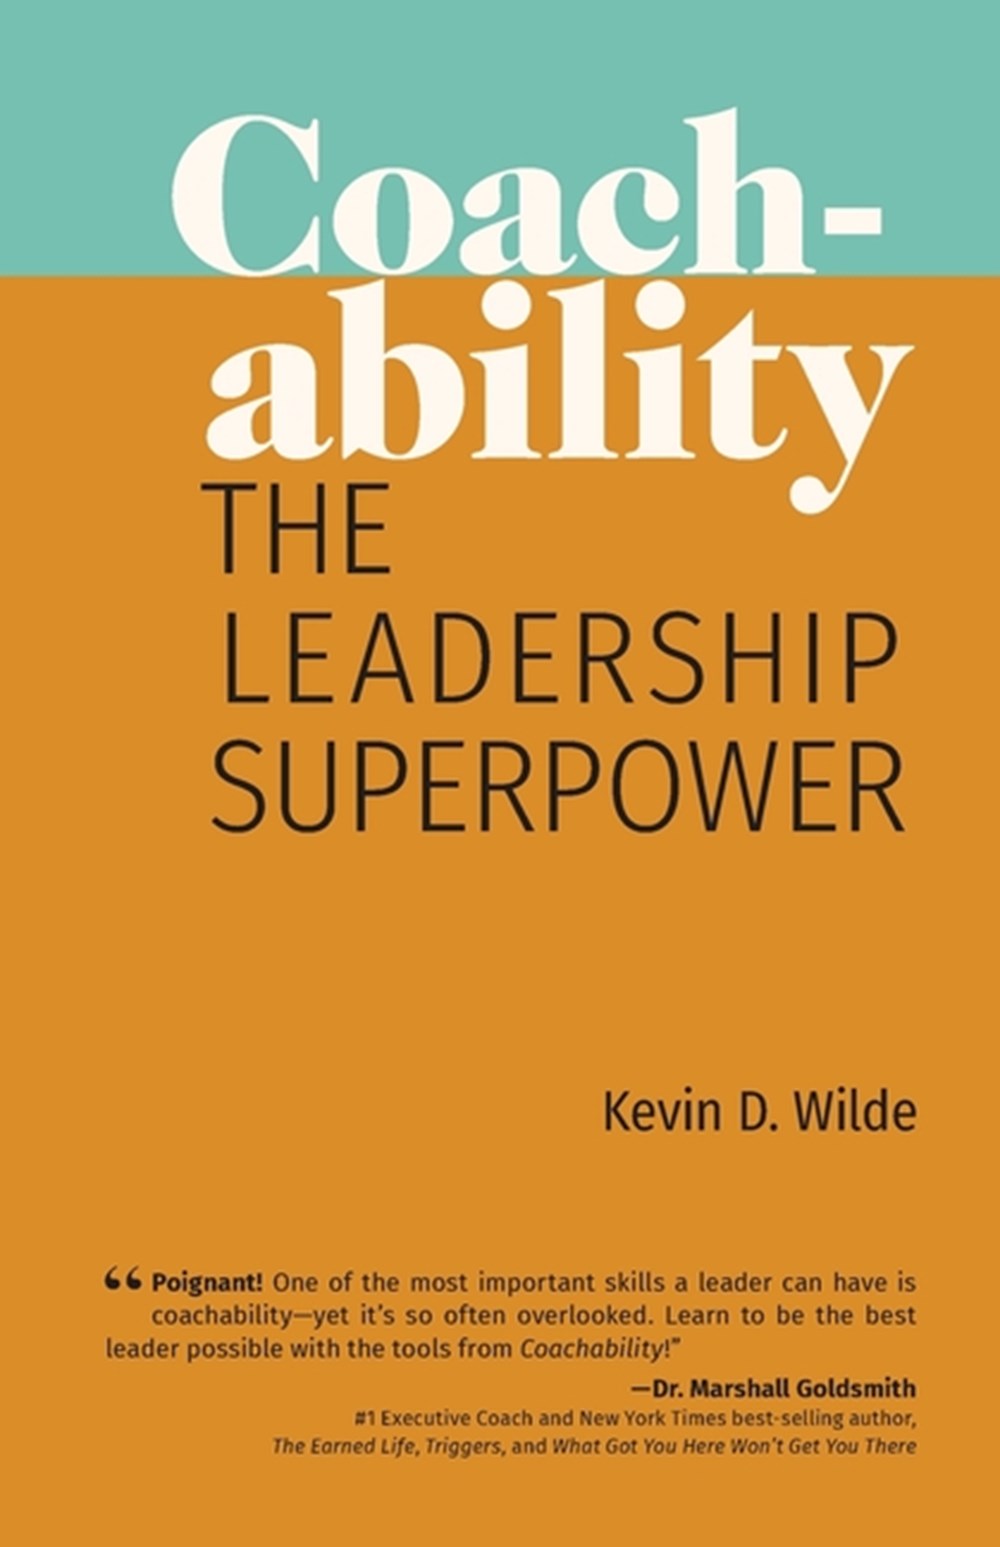 Coachability: The Leadership Superpower